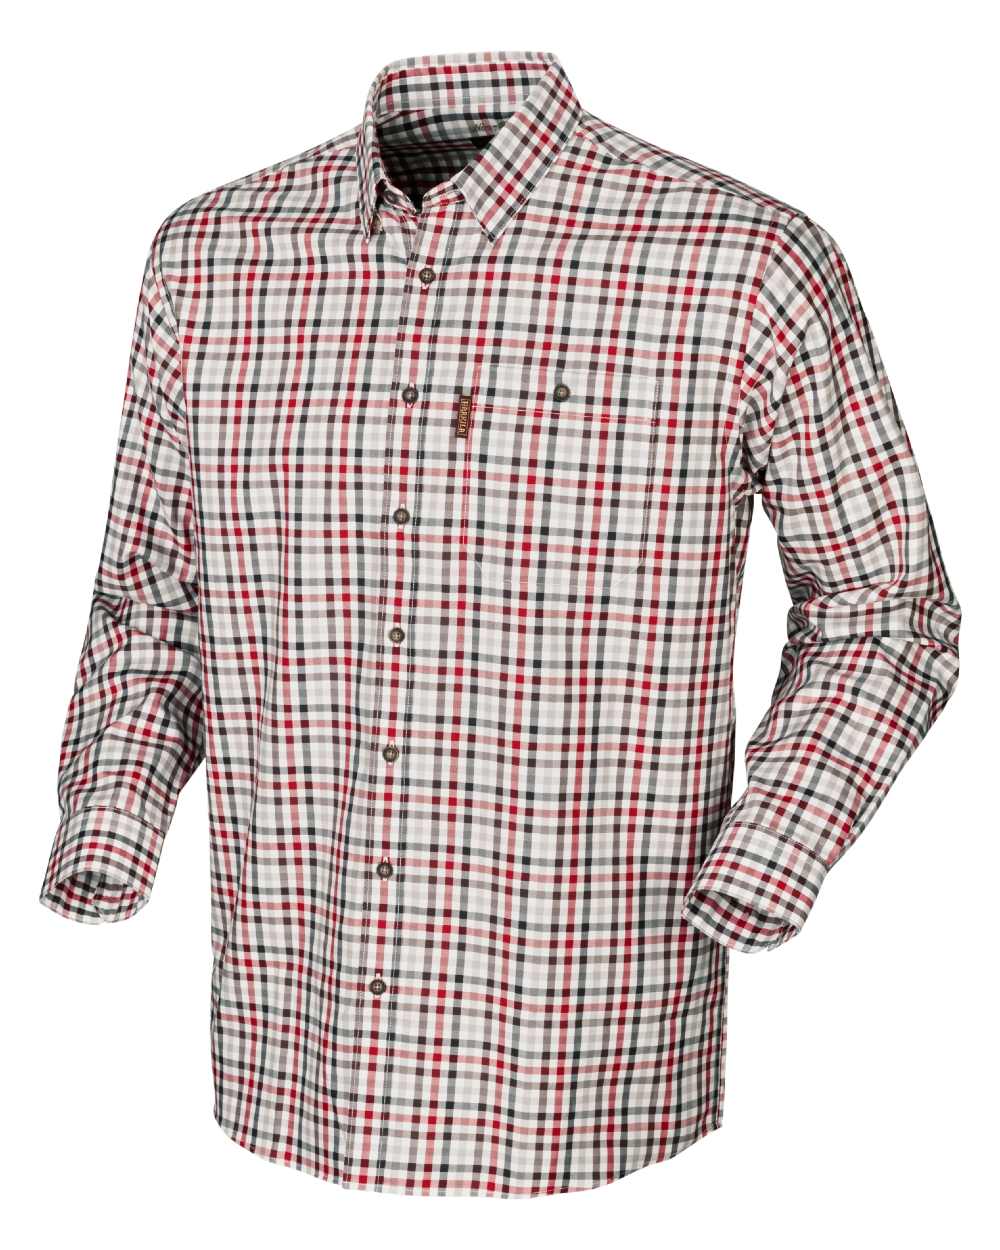 Harkila Milford Shirt in Jester Red Check 